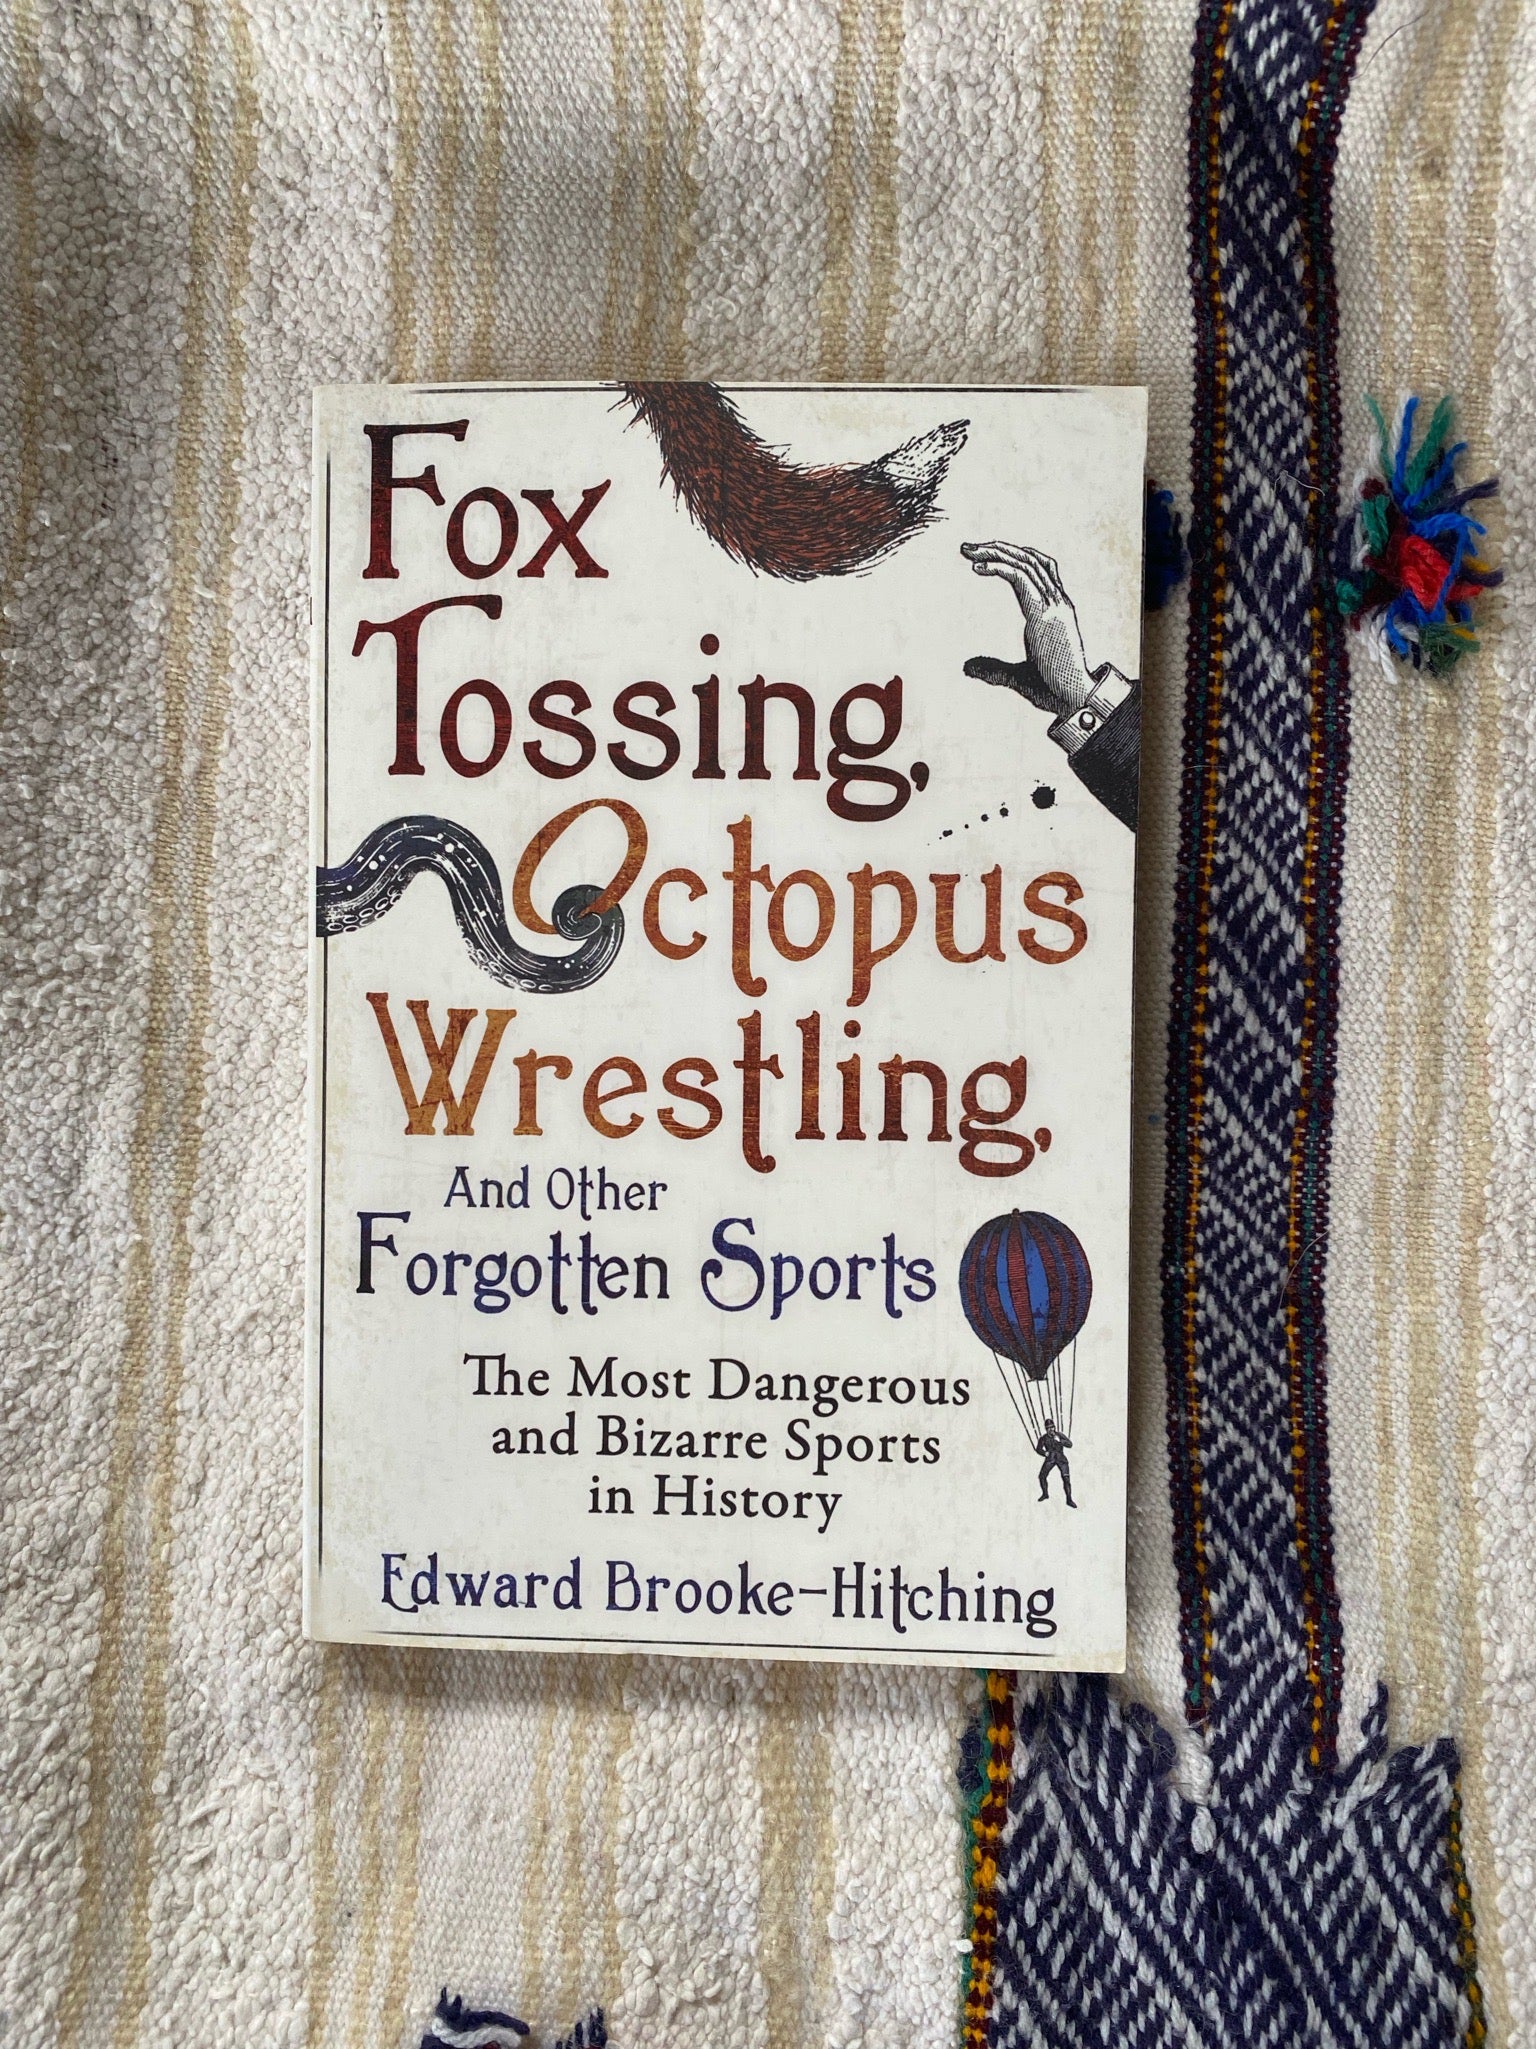 Fox Tossing, Octopus Wrestling, and Other Forgotten Sports – Lolapalooza  London